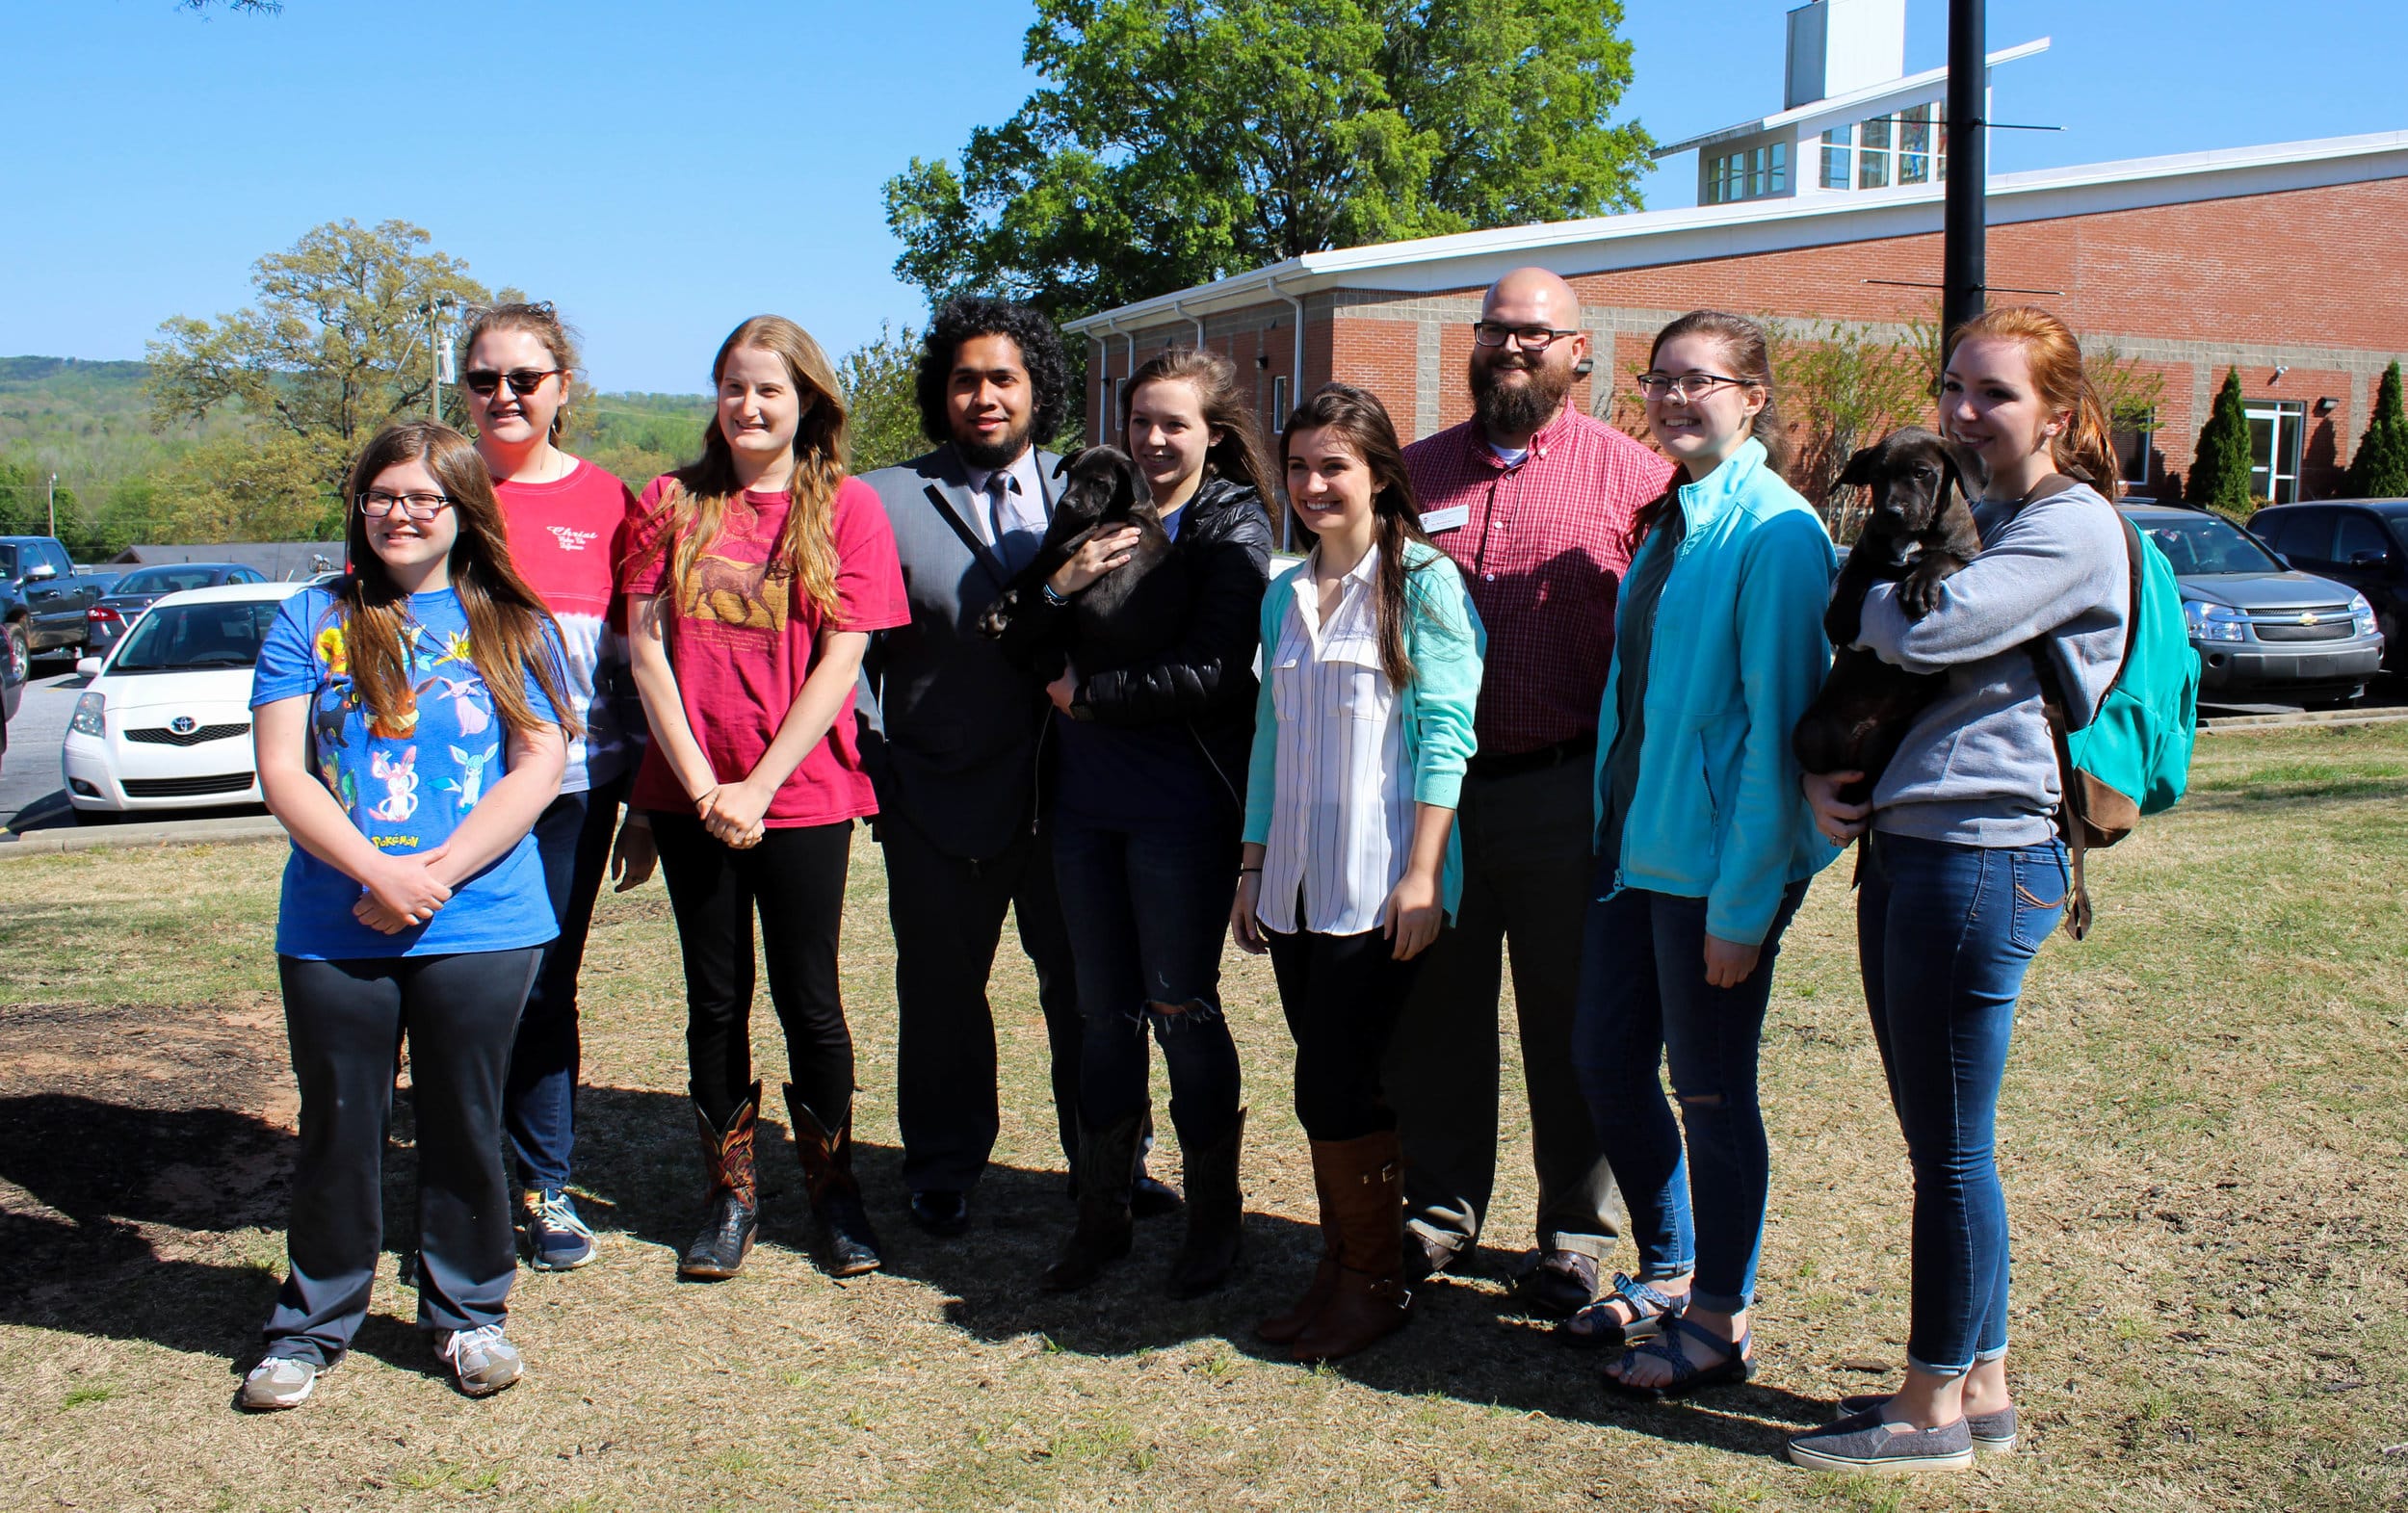 The Animal Science Club, who hosted the event, get together with some puppies to take a picture.